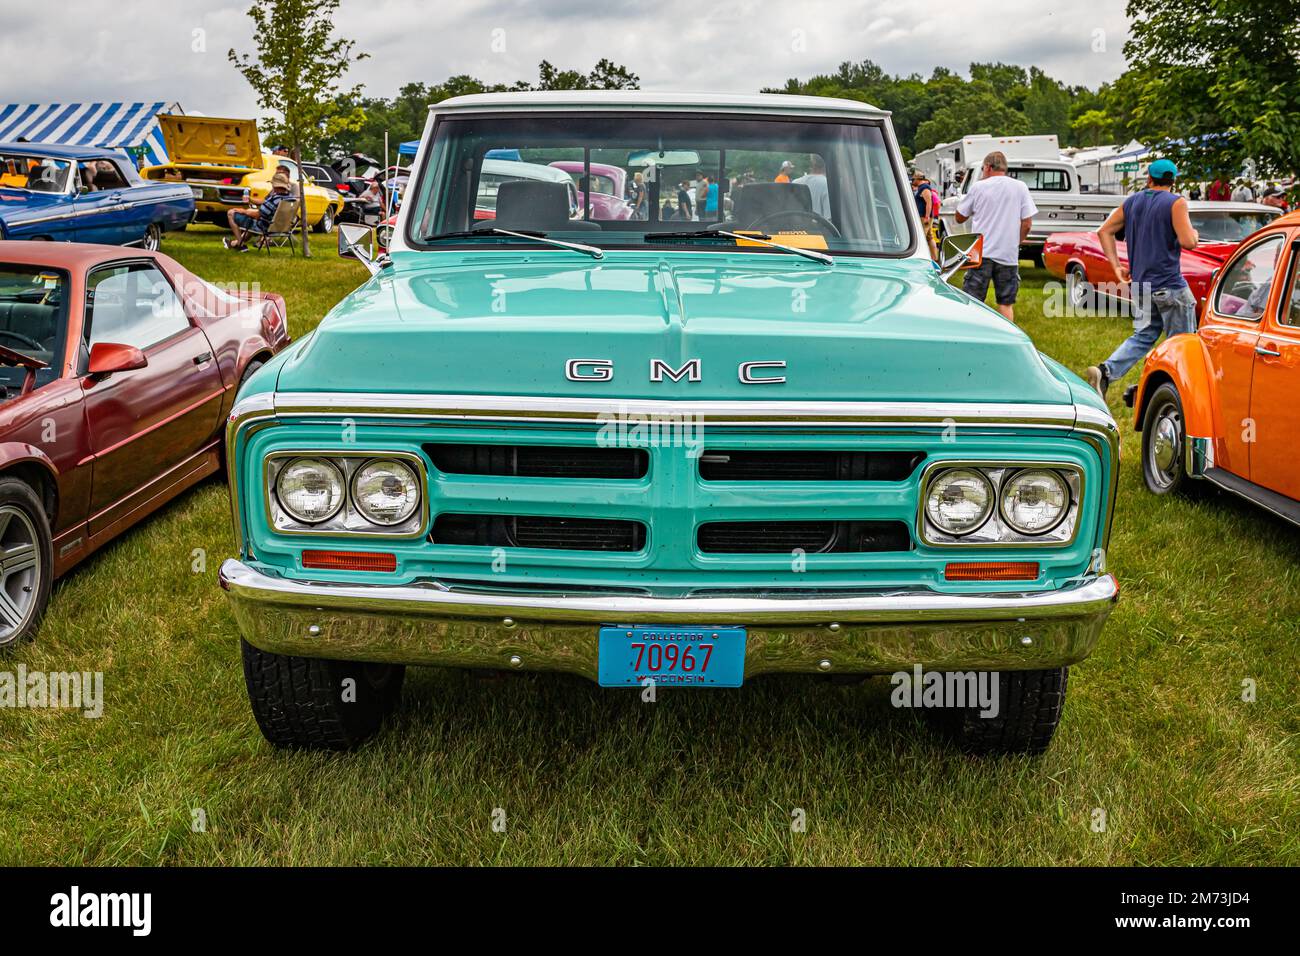 Iola, WI - July 07, 2022: High perspective front view of a 1968 GMC 1500 Stepside Pickup Truck at a local car show. Stock Photo